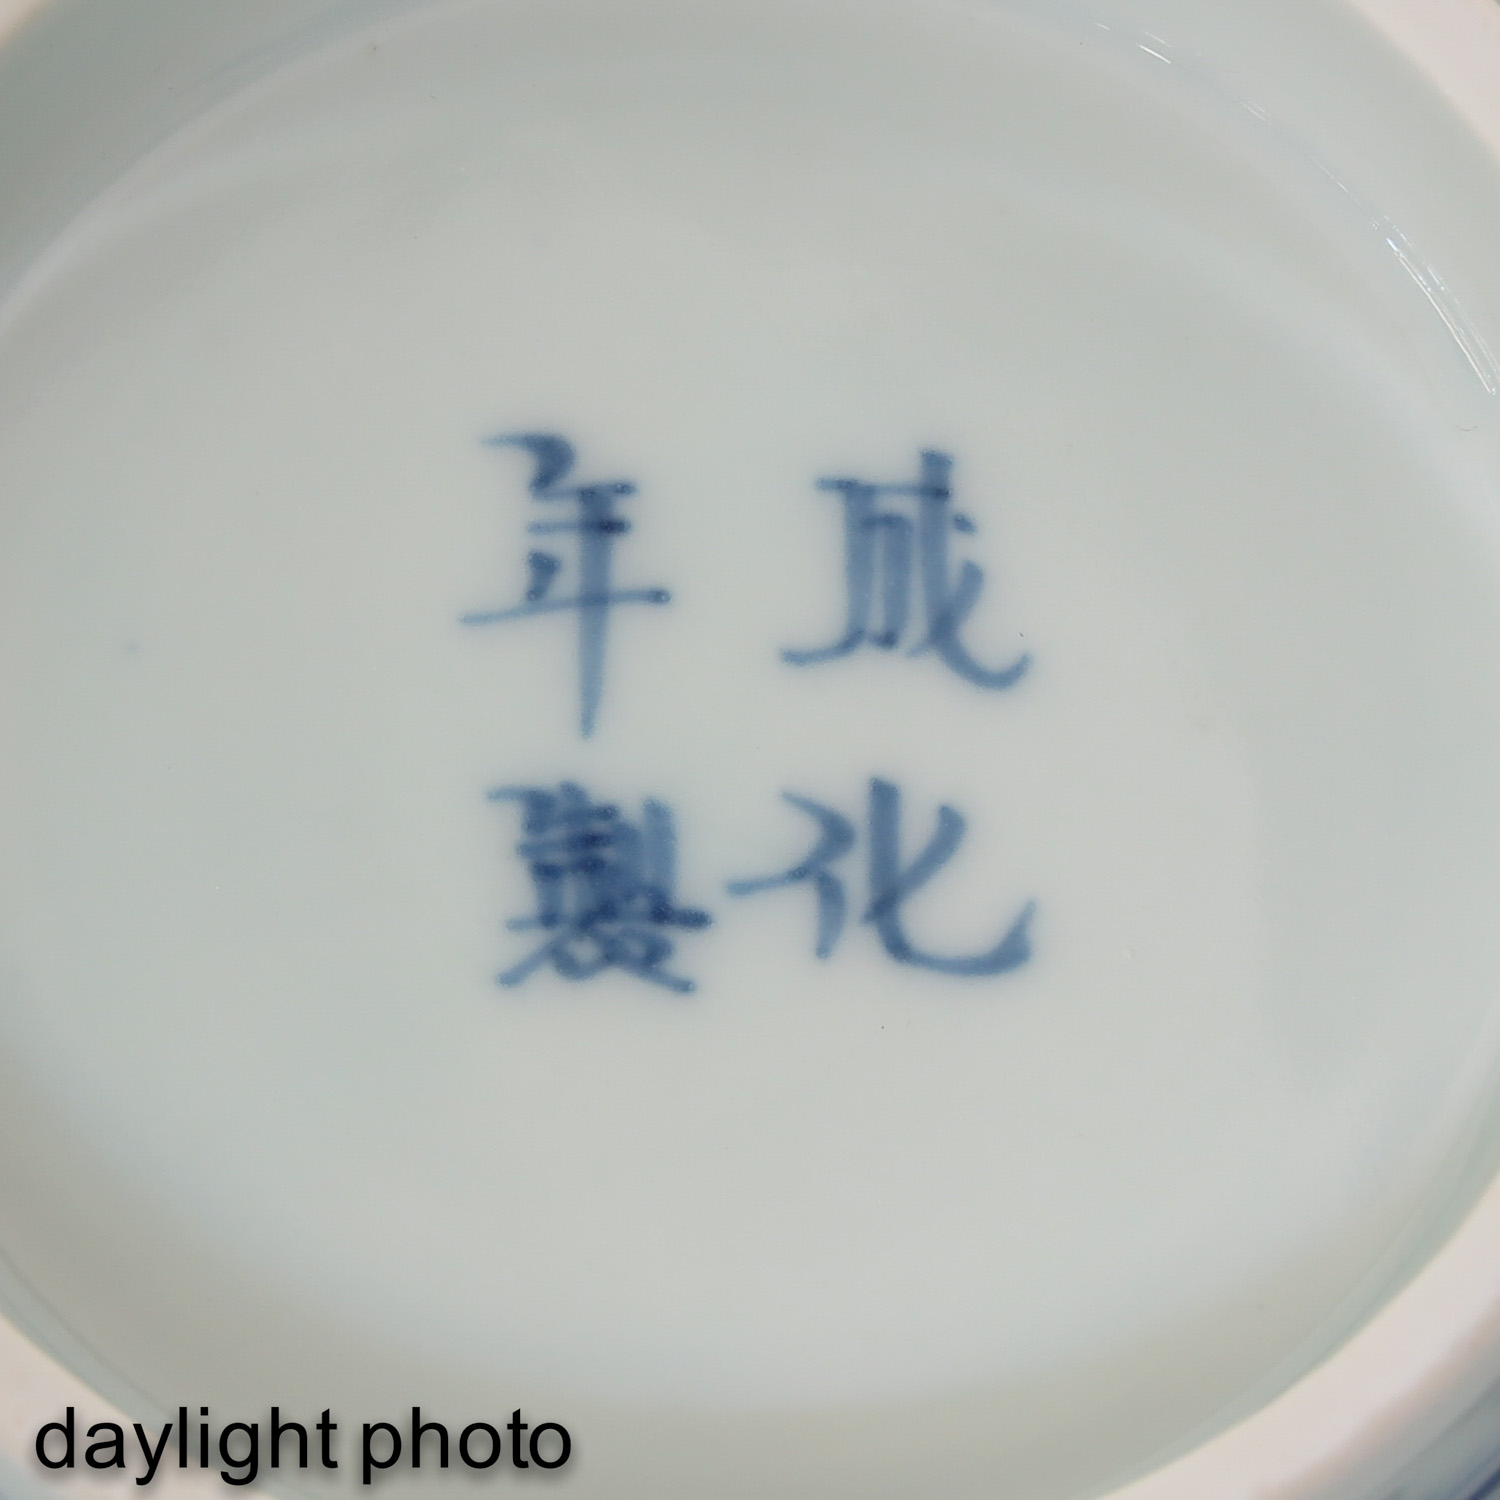 A Pair of Blue and White Bowls - Image 9 of 9